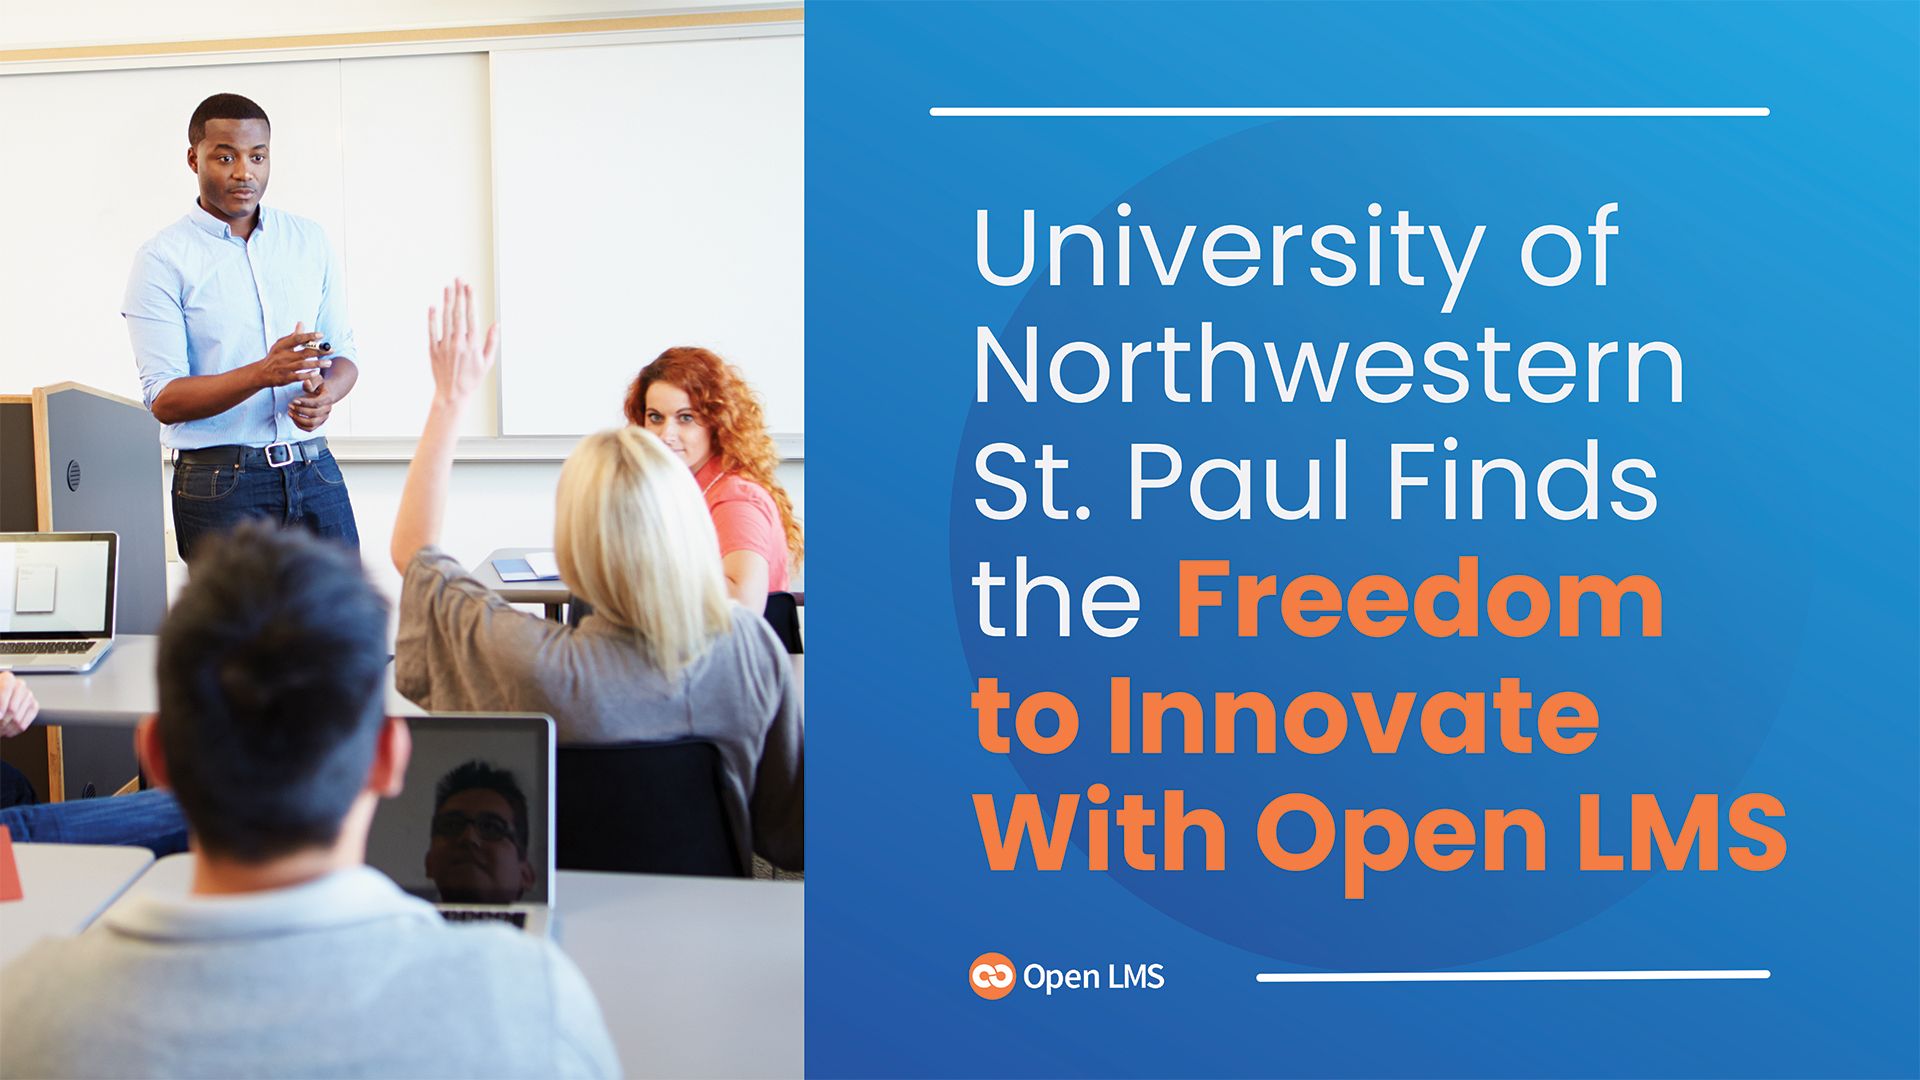 University of Northwestern St. Paul Finds the Freedom to Innovate With Open LMS